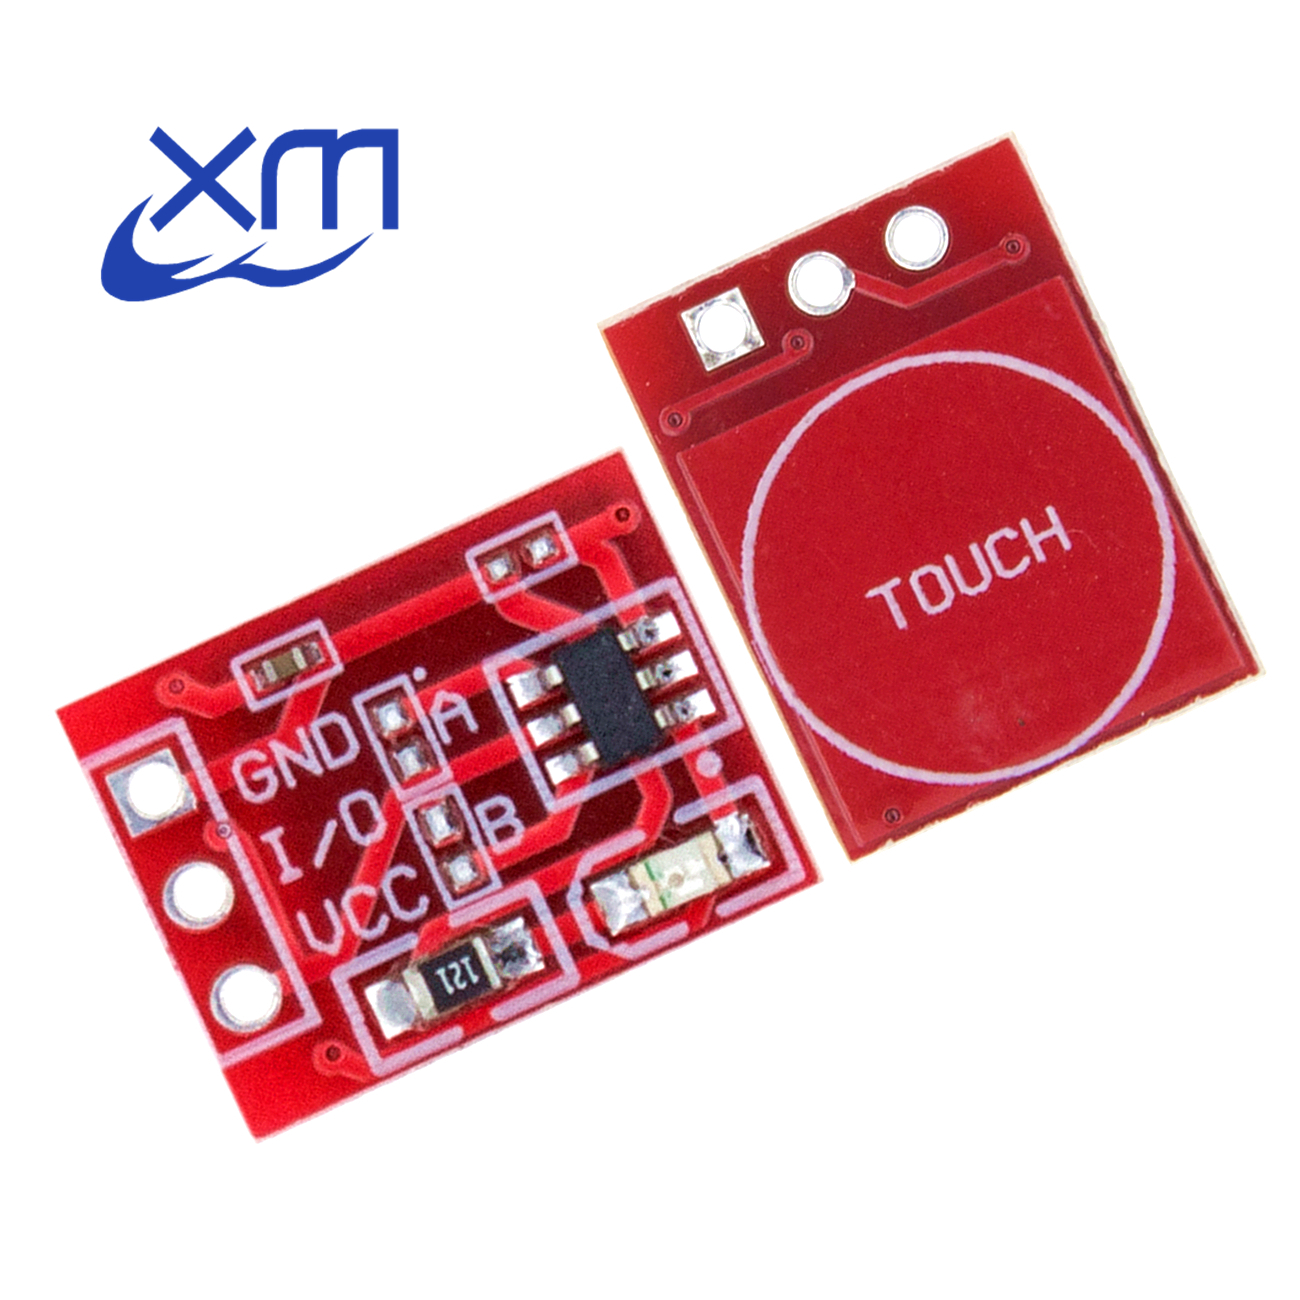 50pcs NEW TTP223 Touch button Module Capacitor type Single Channel Self  Locking Touch switch sensor (Red) - Price history  Review | AliExpress  Seller - SZ Aitexm Store | Alitools.io